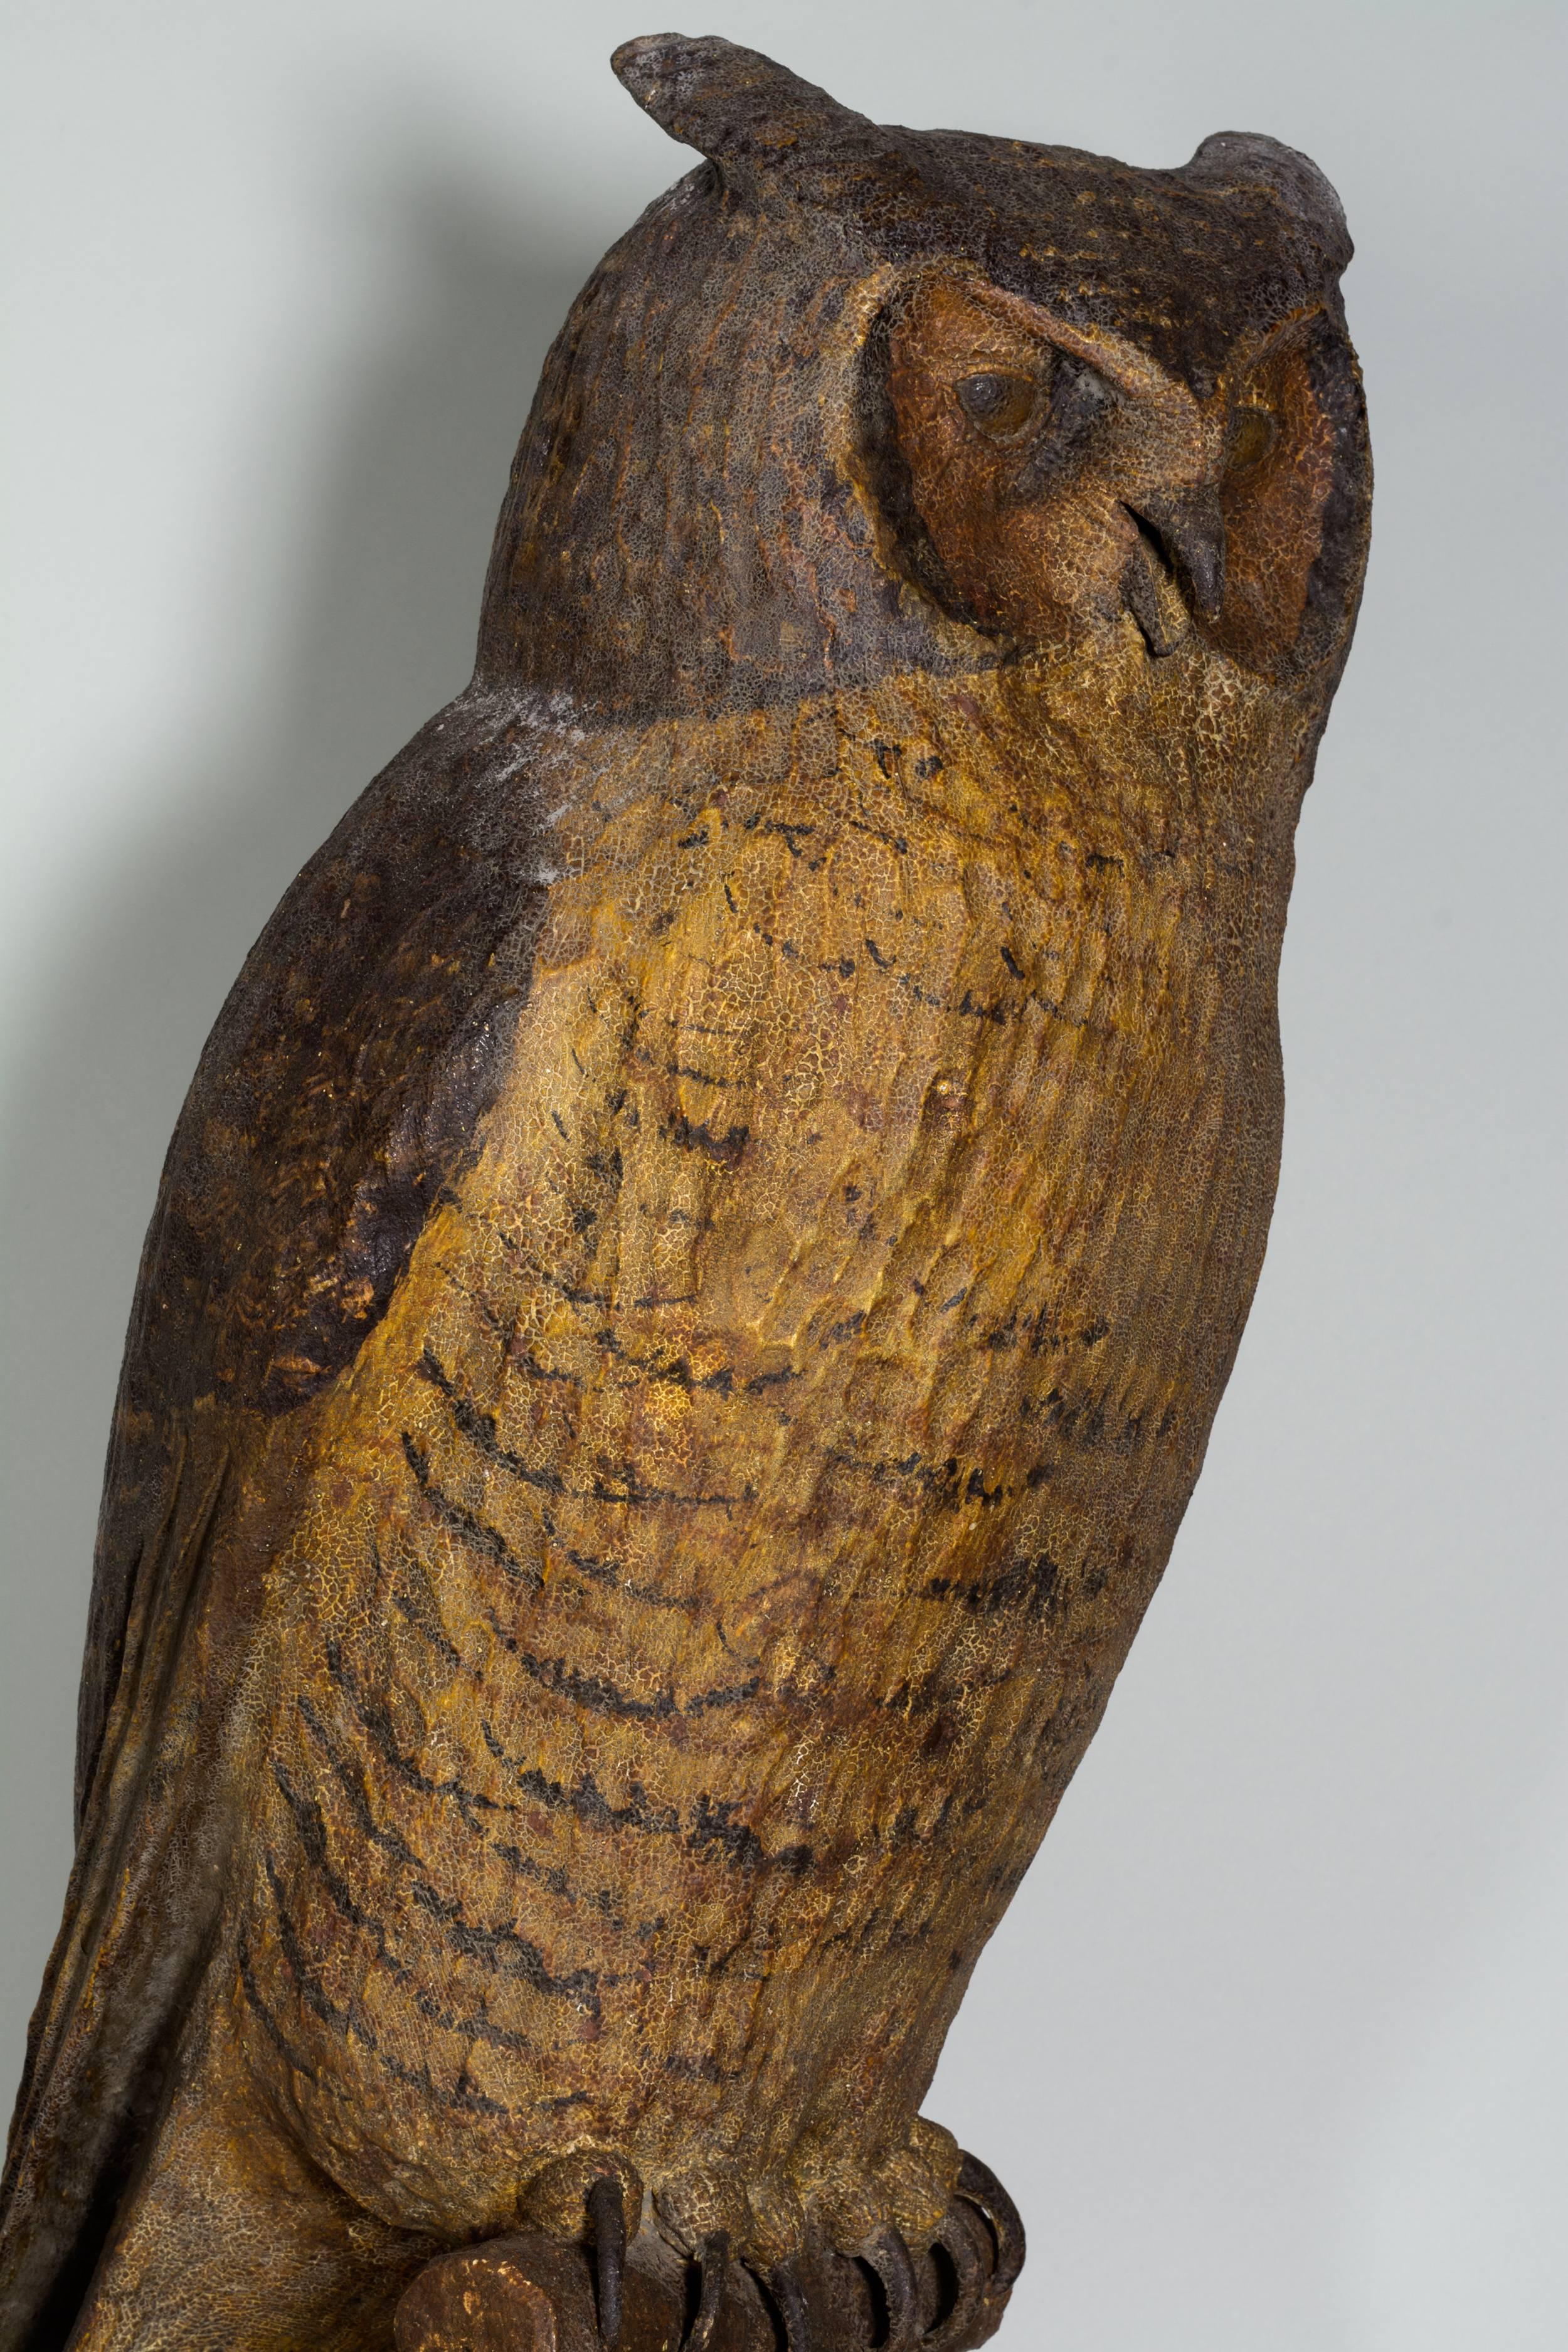 An outstanding carved & painted life size great horned owl carved by noted artist Frank Finney, b.1947. Hollow-carved out of Tupelo wood with realistic antique looking paint and is mounted on a perch with the beak partially opened. A fine example of